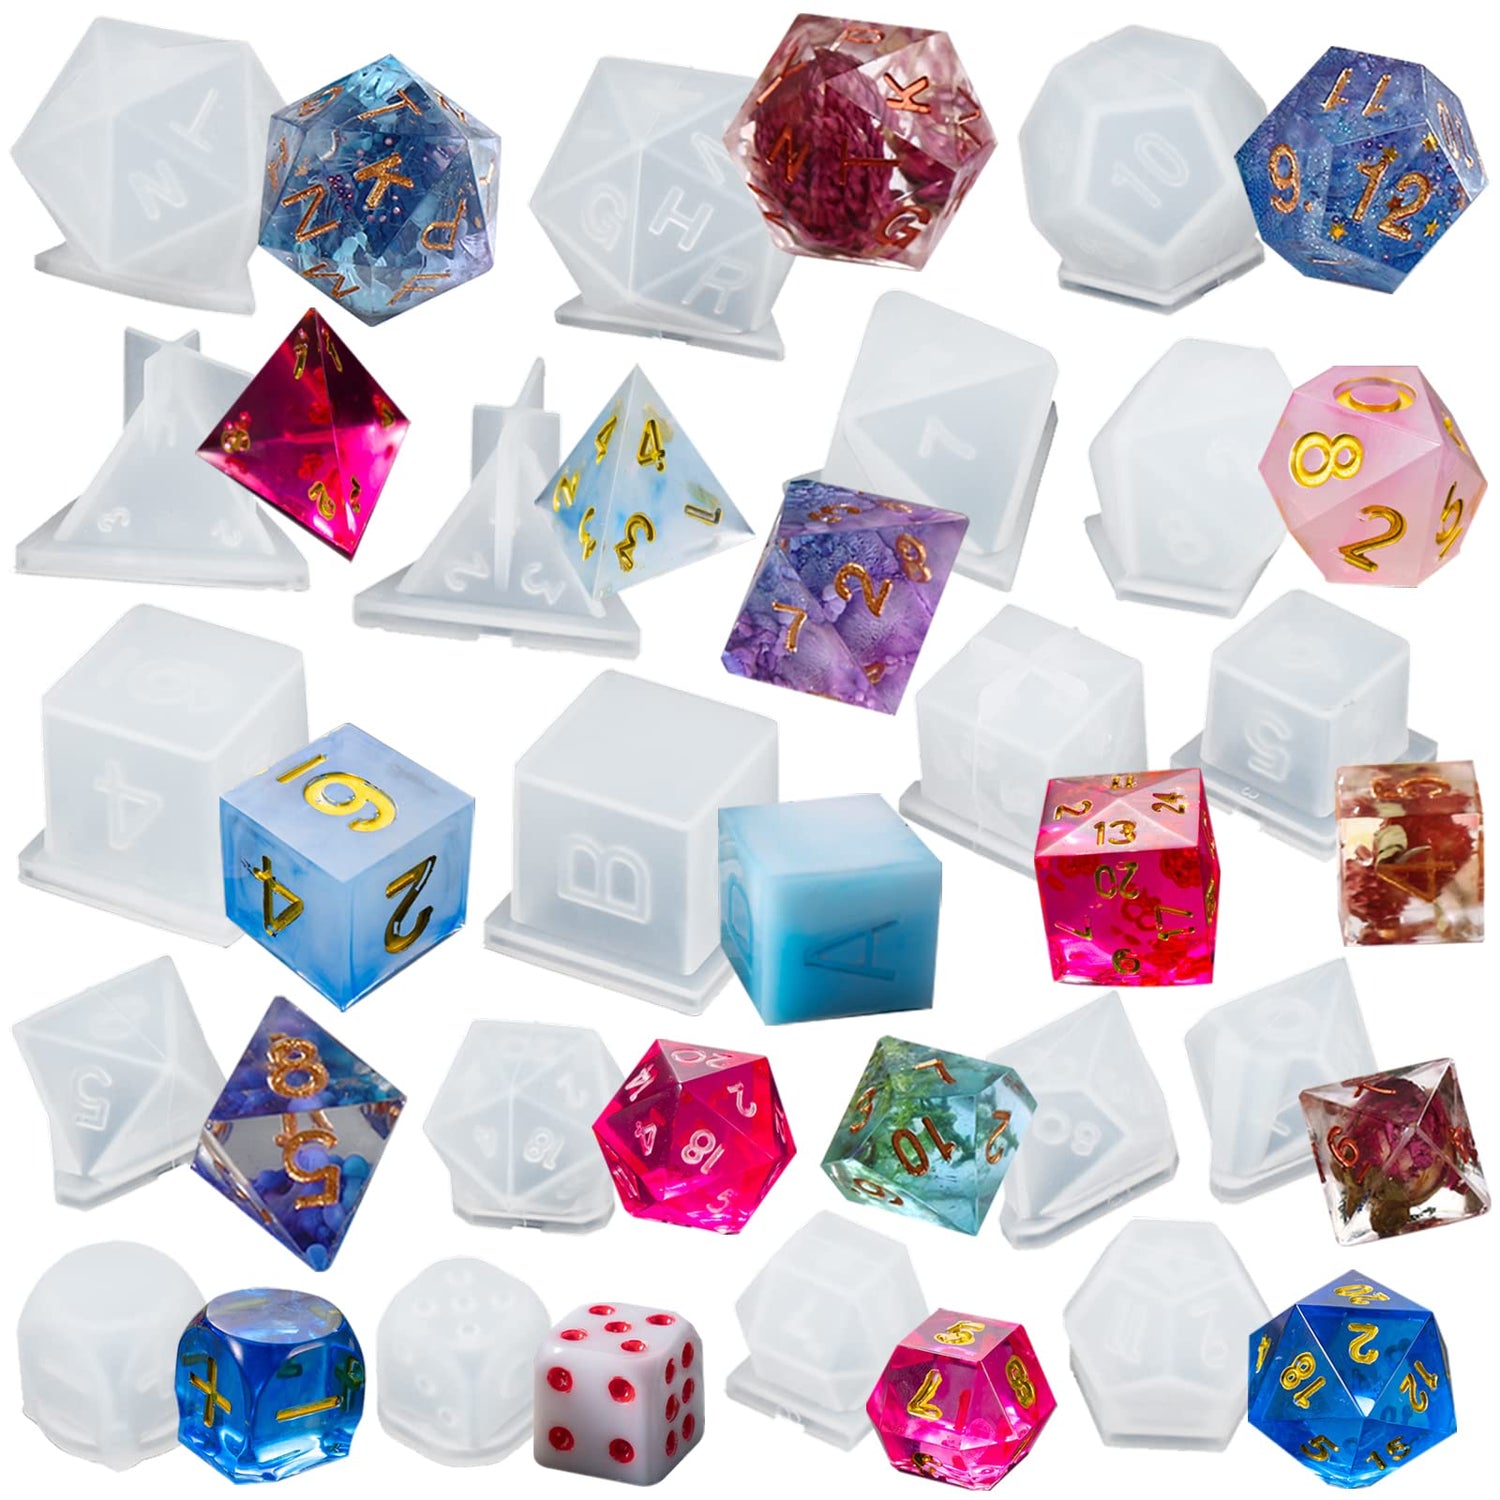 Dice Molds for Resin,Resin Dice Mold Set with Letter Number